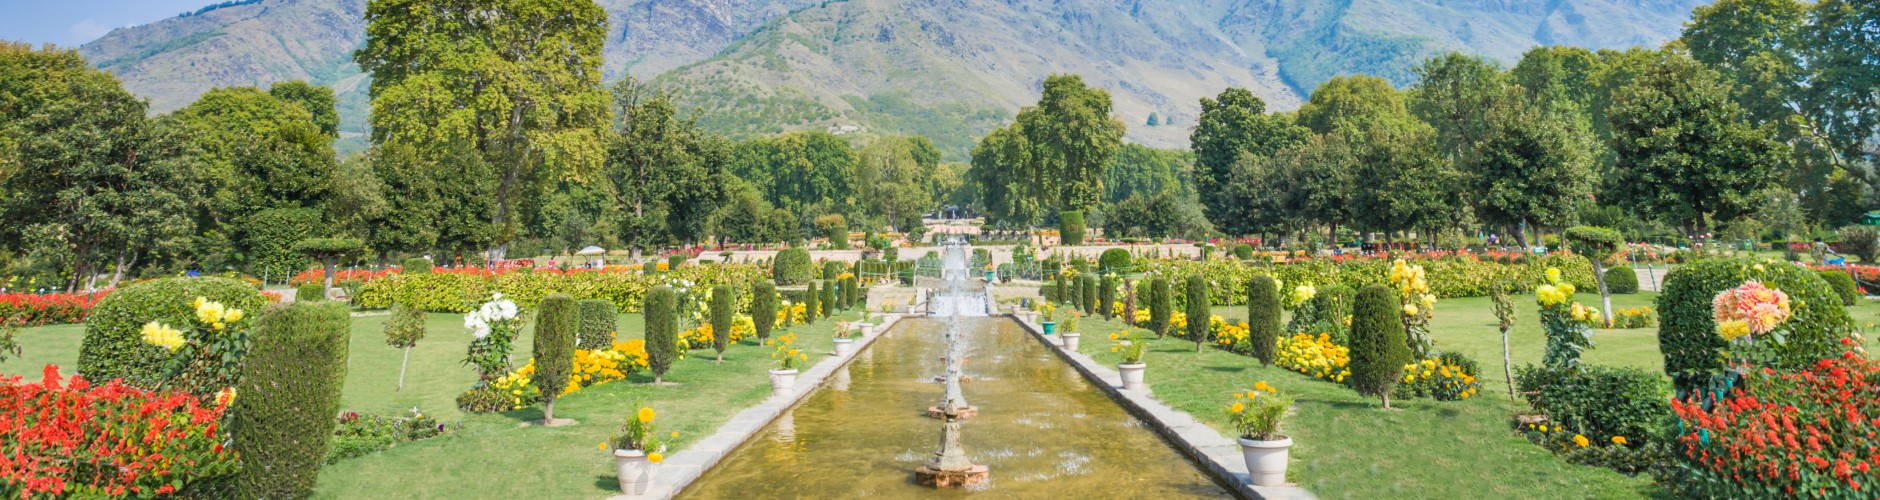 An open garden with fountain in the centre and mountains surrounded